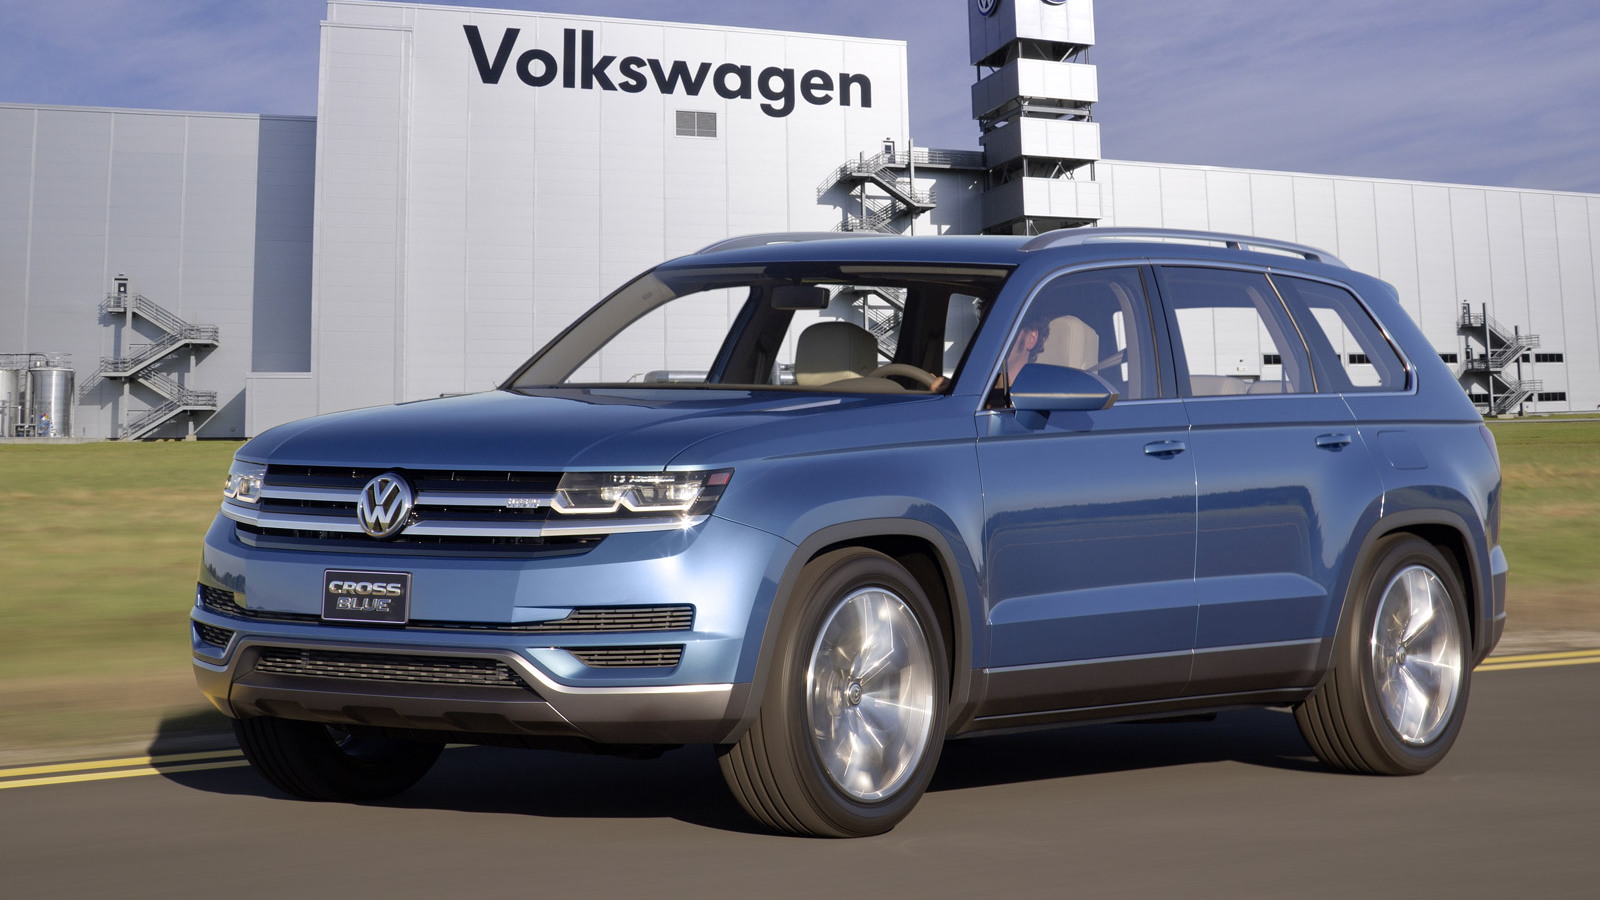 Production version of VW’s CrossBlue concept to be built in Chattanooga